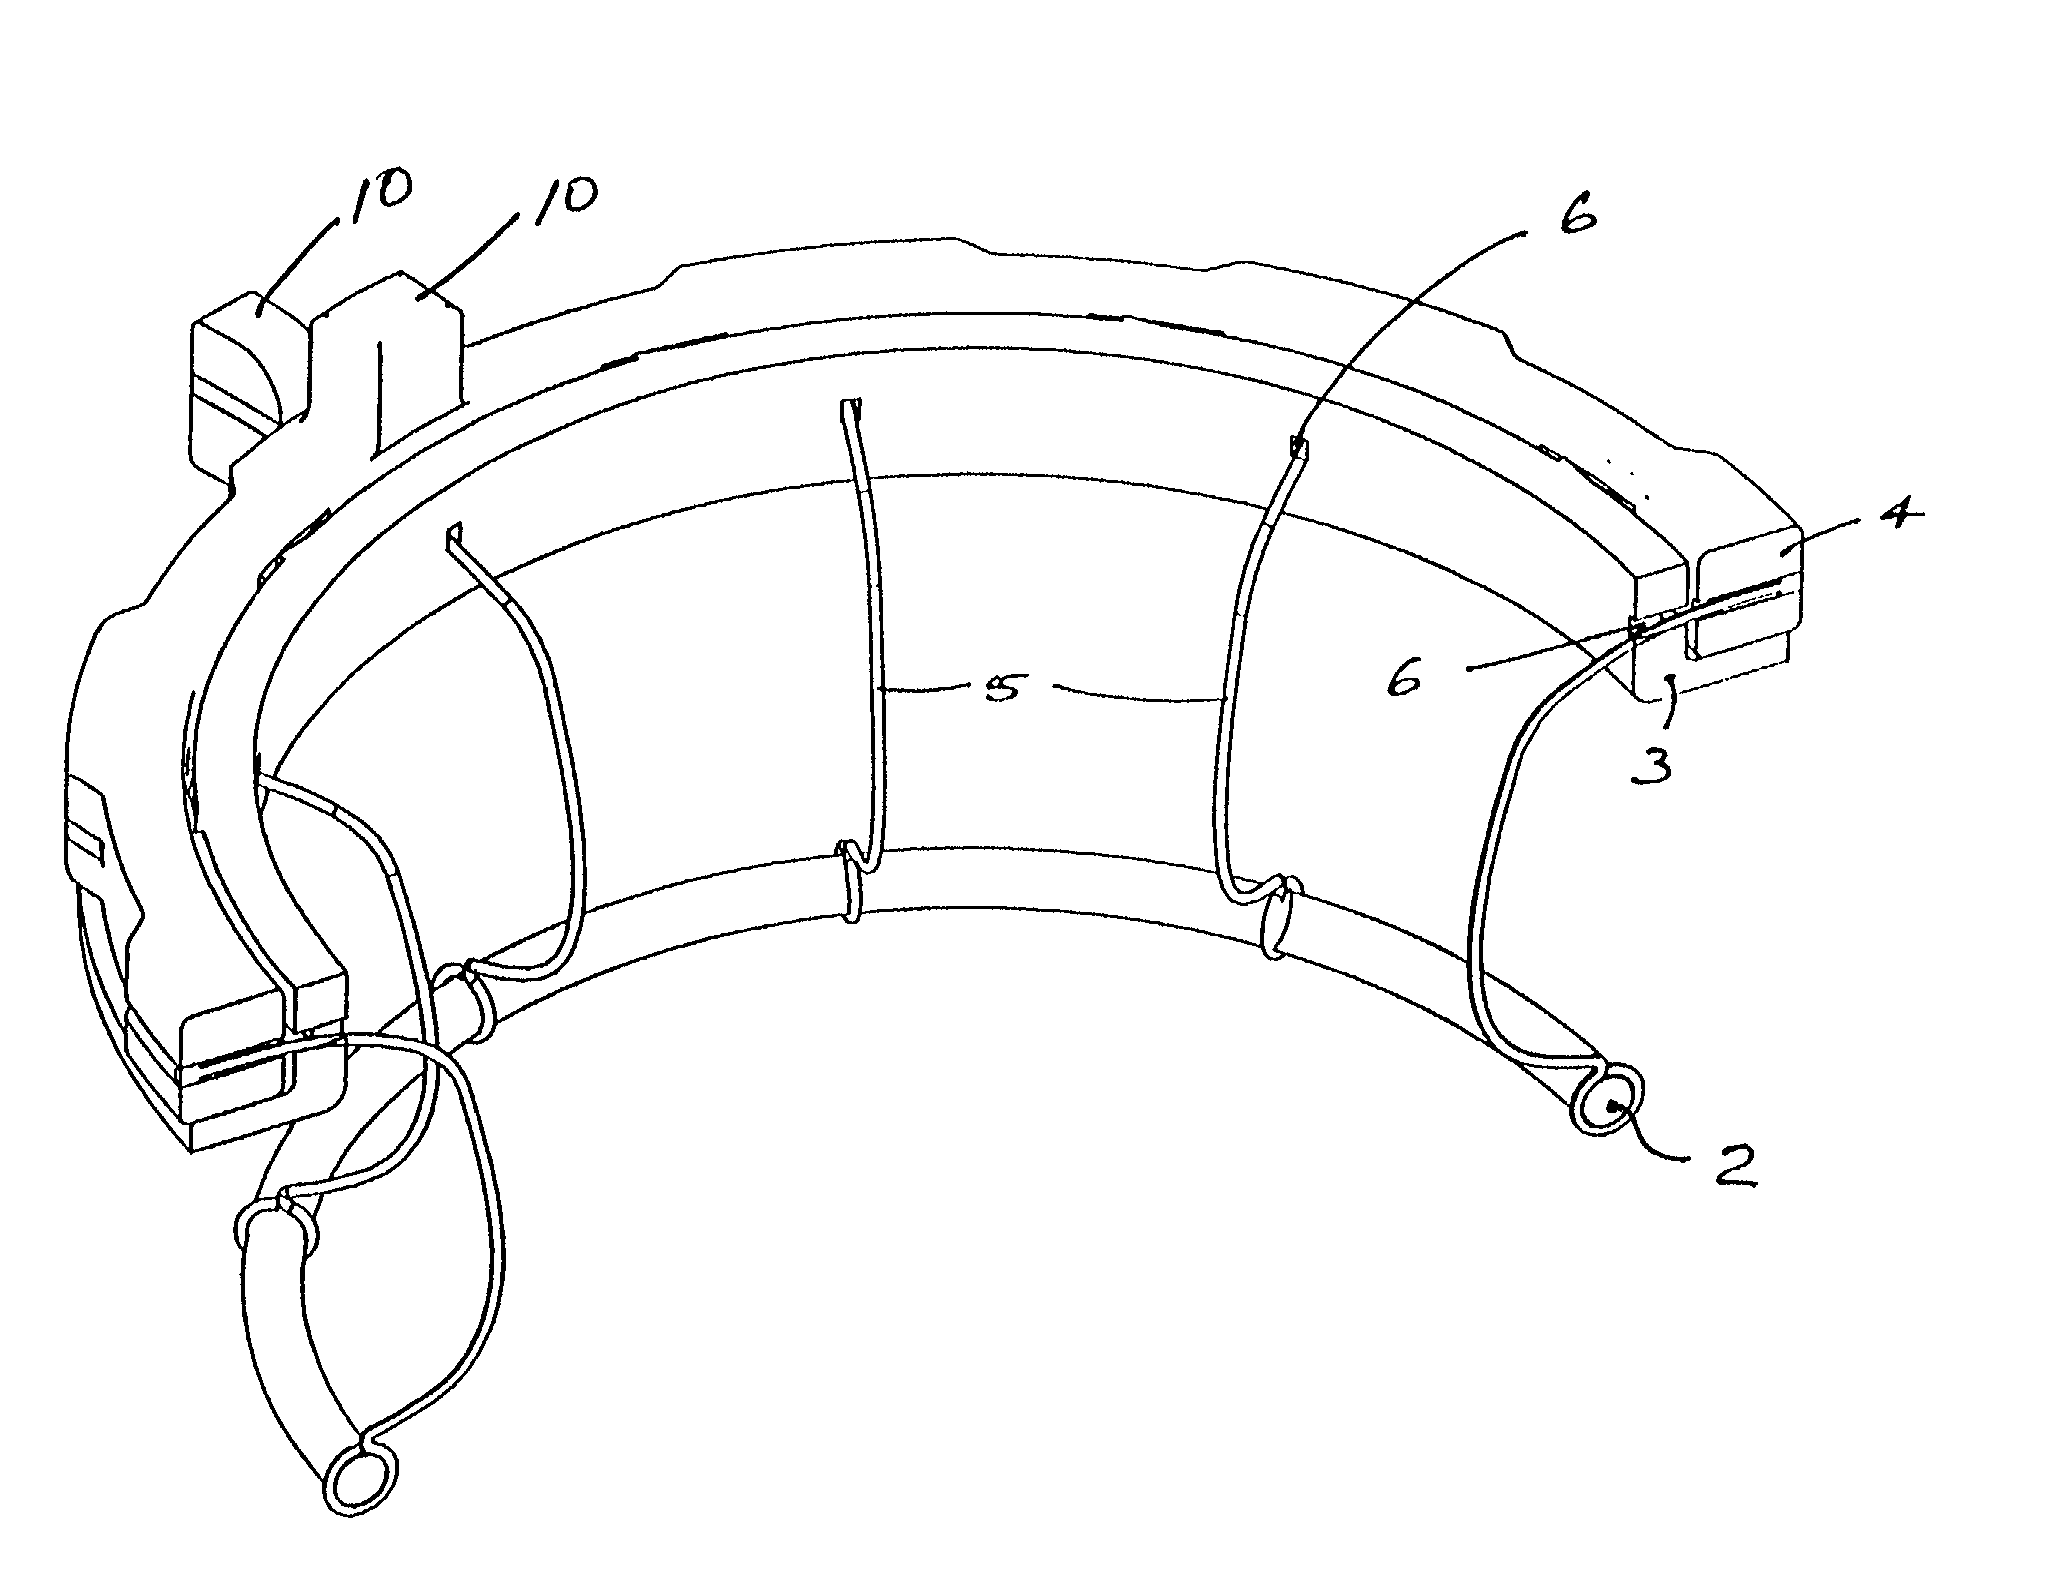 Device for use in surgery